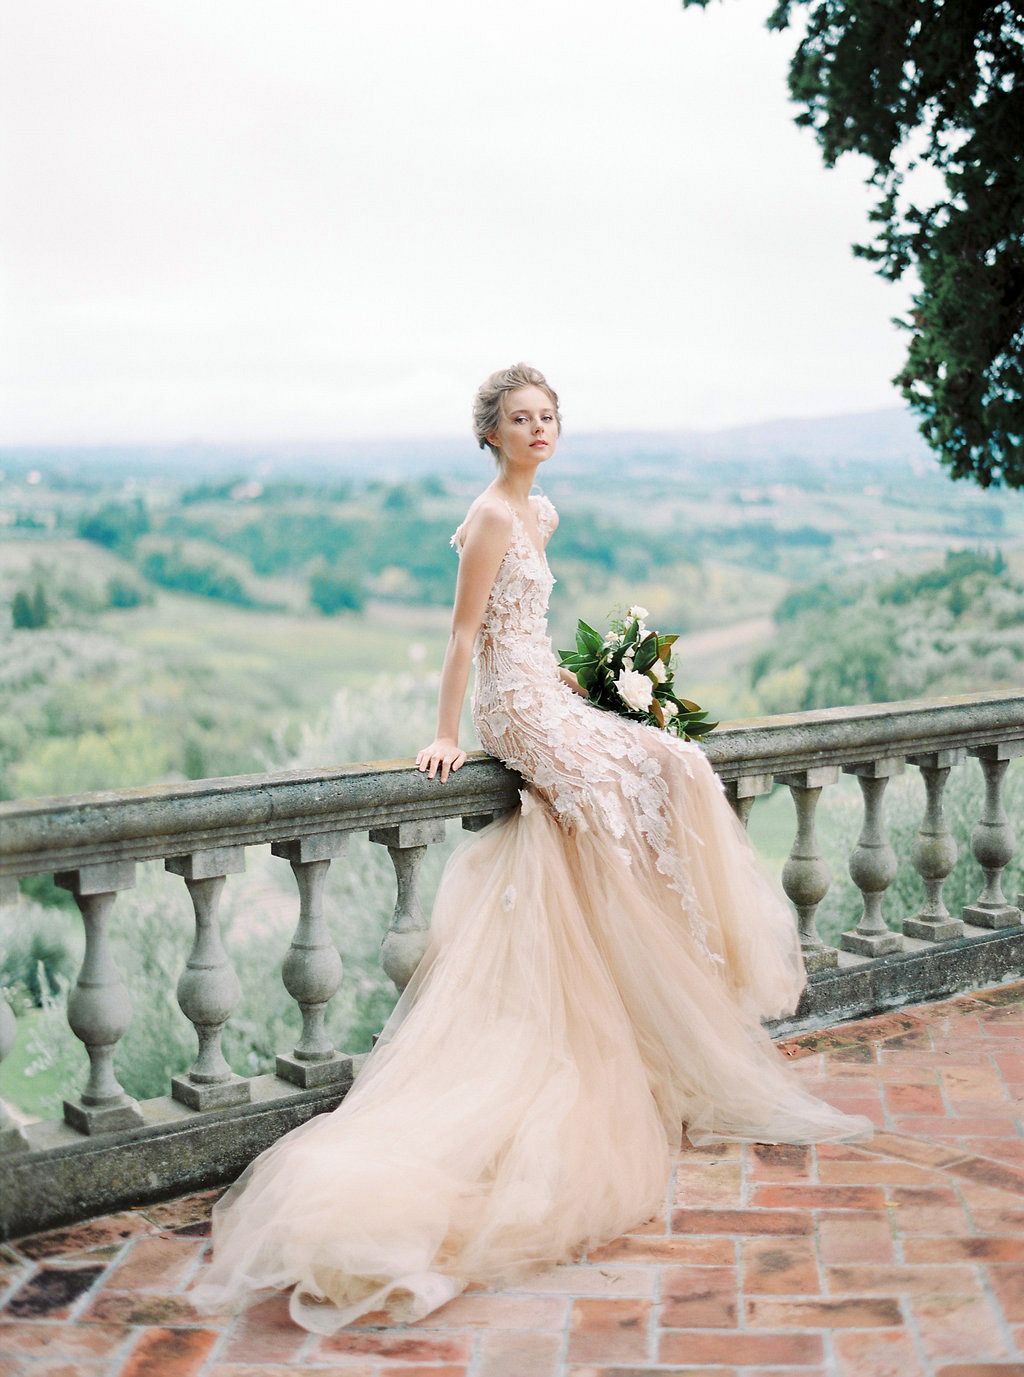 Italian Vogue Editorial in an incredible Nude, Lace Gown